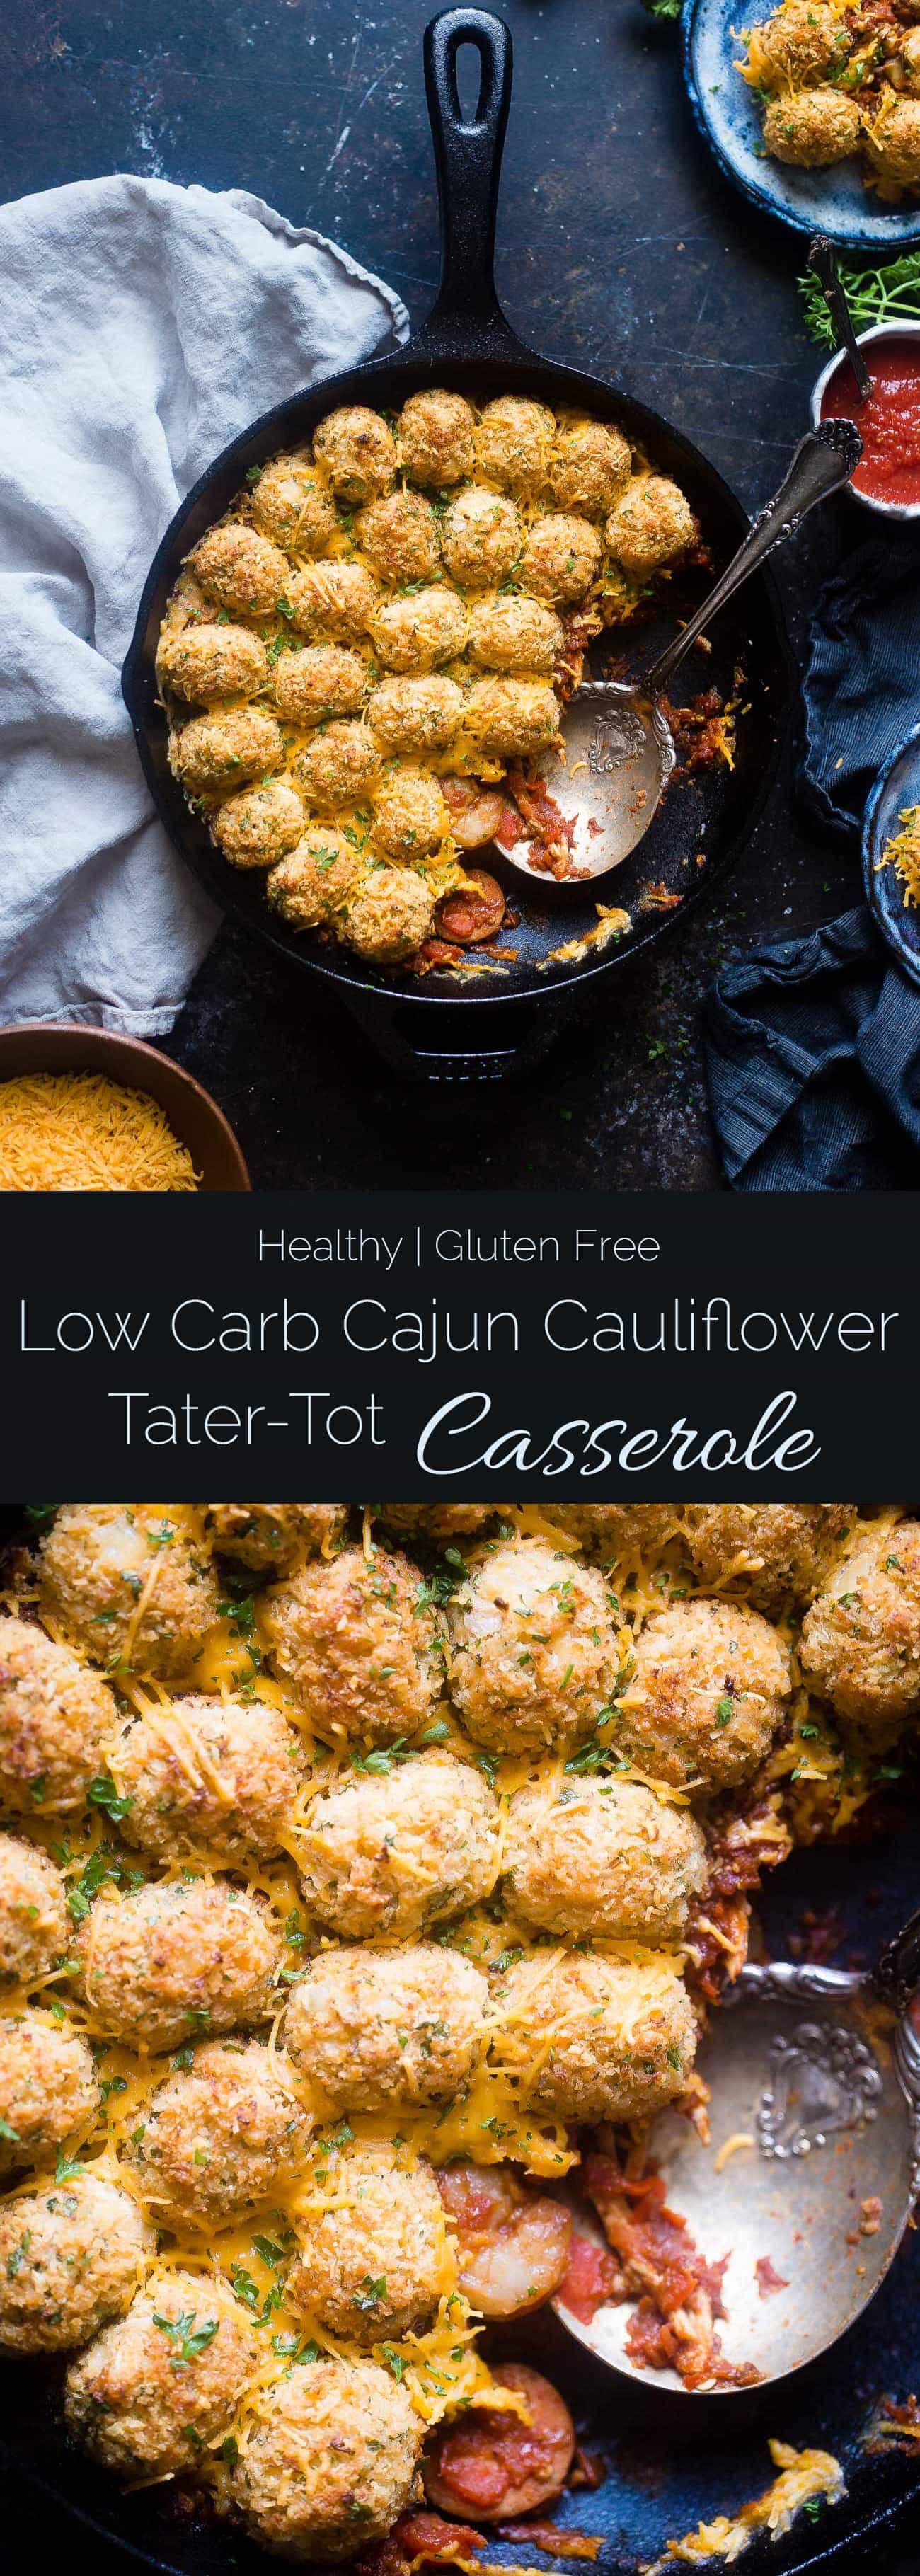 Cajun Cauliflower Tot Casserole - This lower carb, cheesy casserole is made of spicy, Cajun cauliflower tater tots! It's a healthy, gluten free weeknight dinner that the whole family will love! | Foodfaithfitness.com | @FoodFaithFit